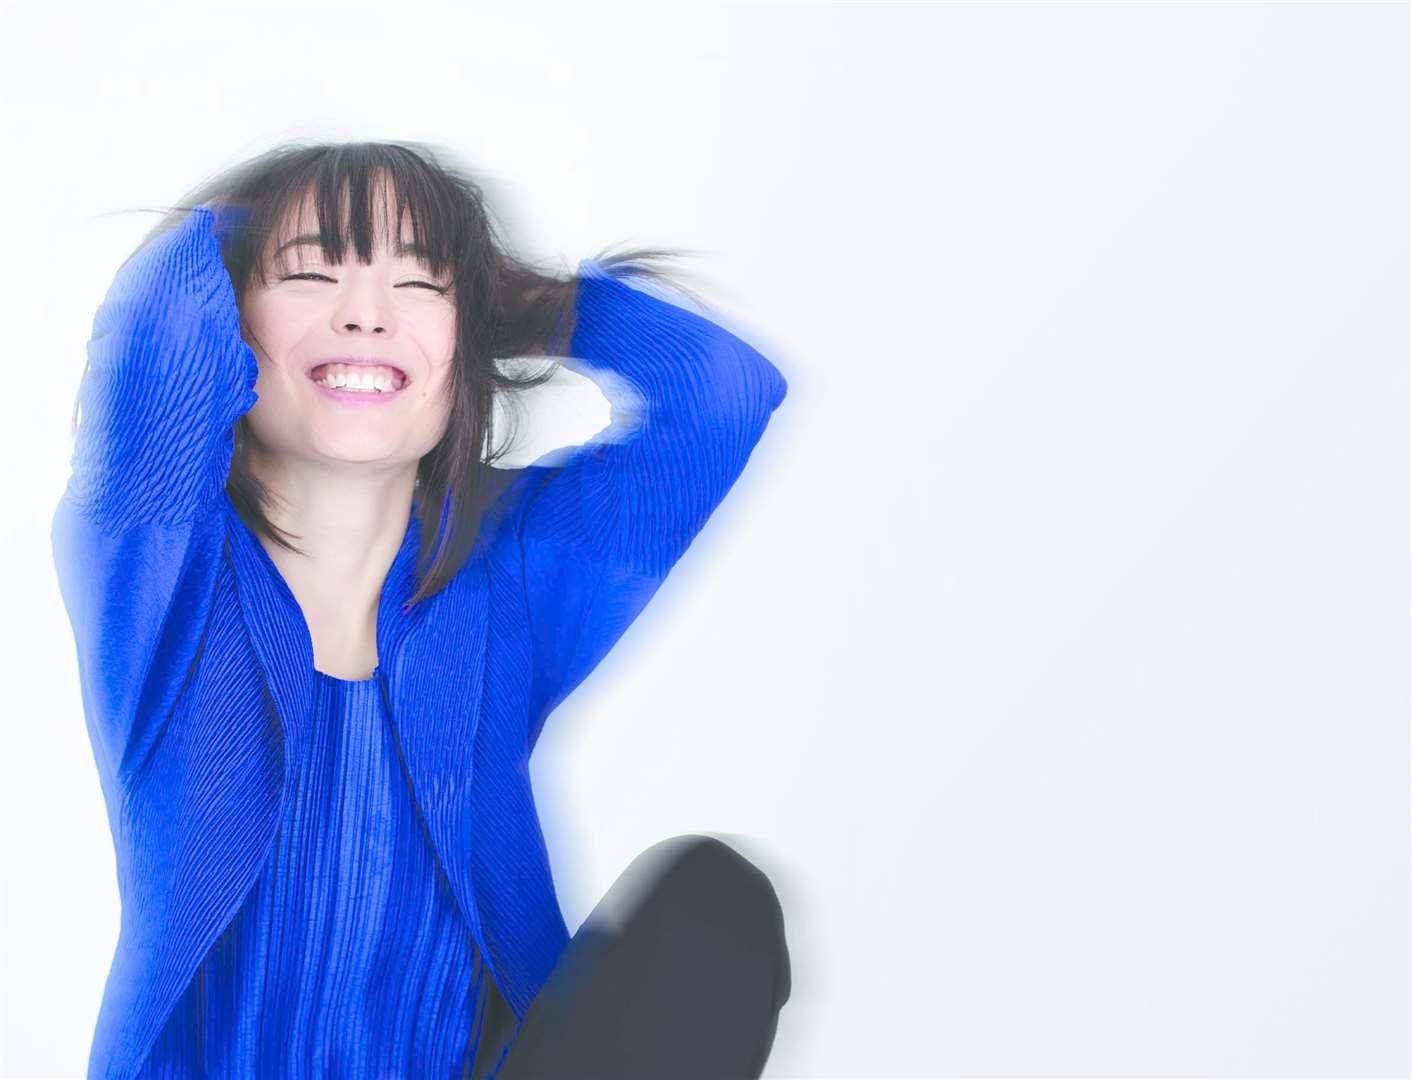 Pianist Alice Sara Ott will be performing at the Music Hall.